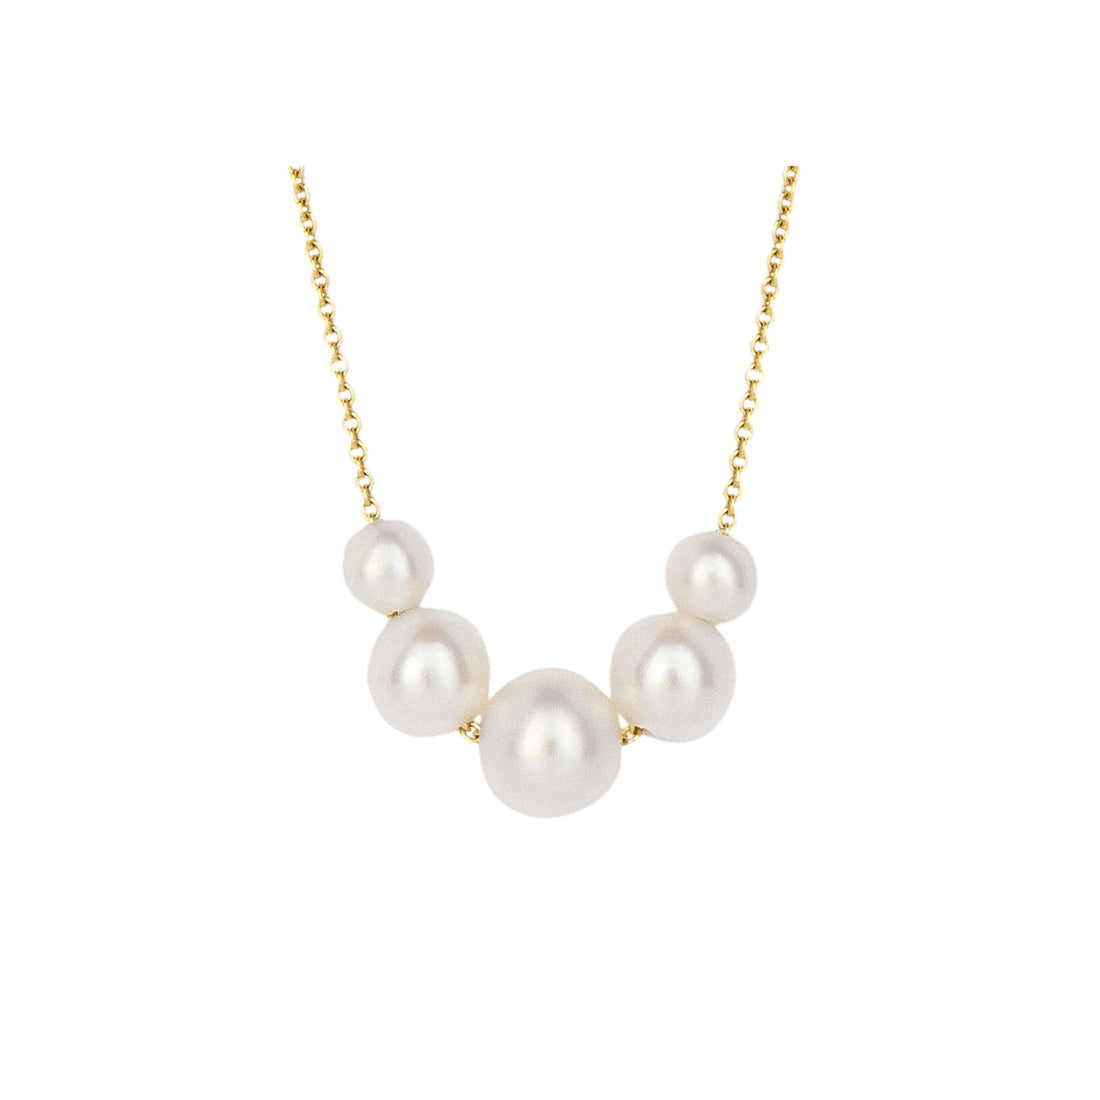 Trace Chain Necklace with Freshwater Pearl in 9ct Yellow Gold - Robert Anthony Jewellers, Edinburgh